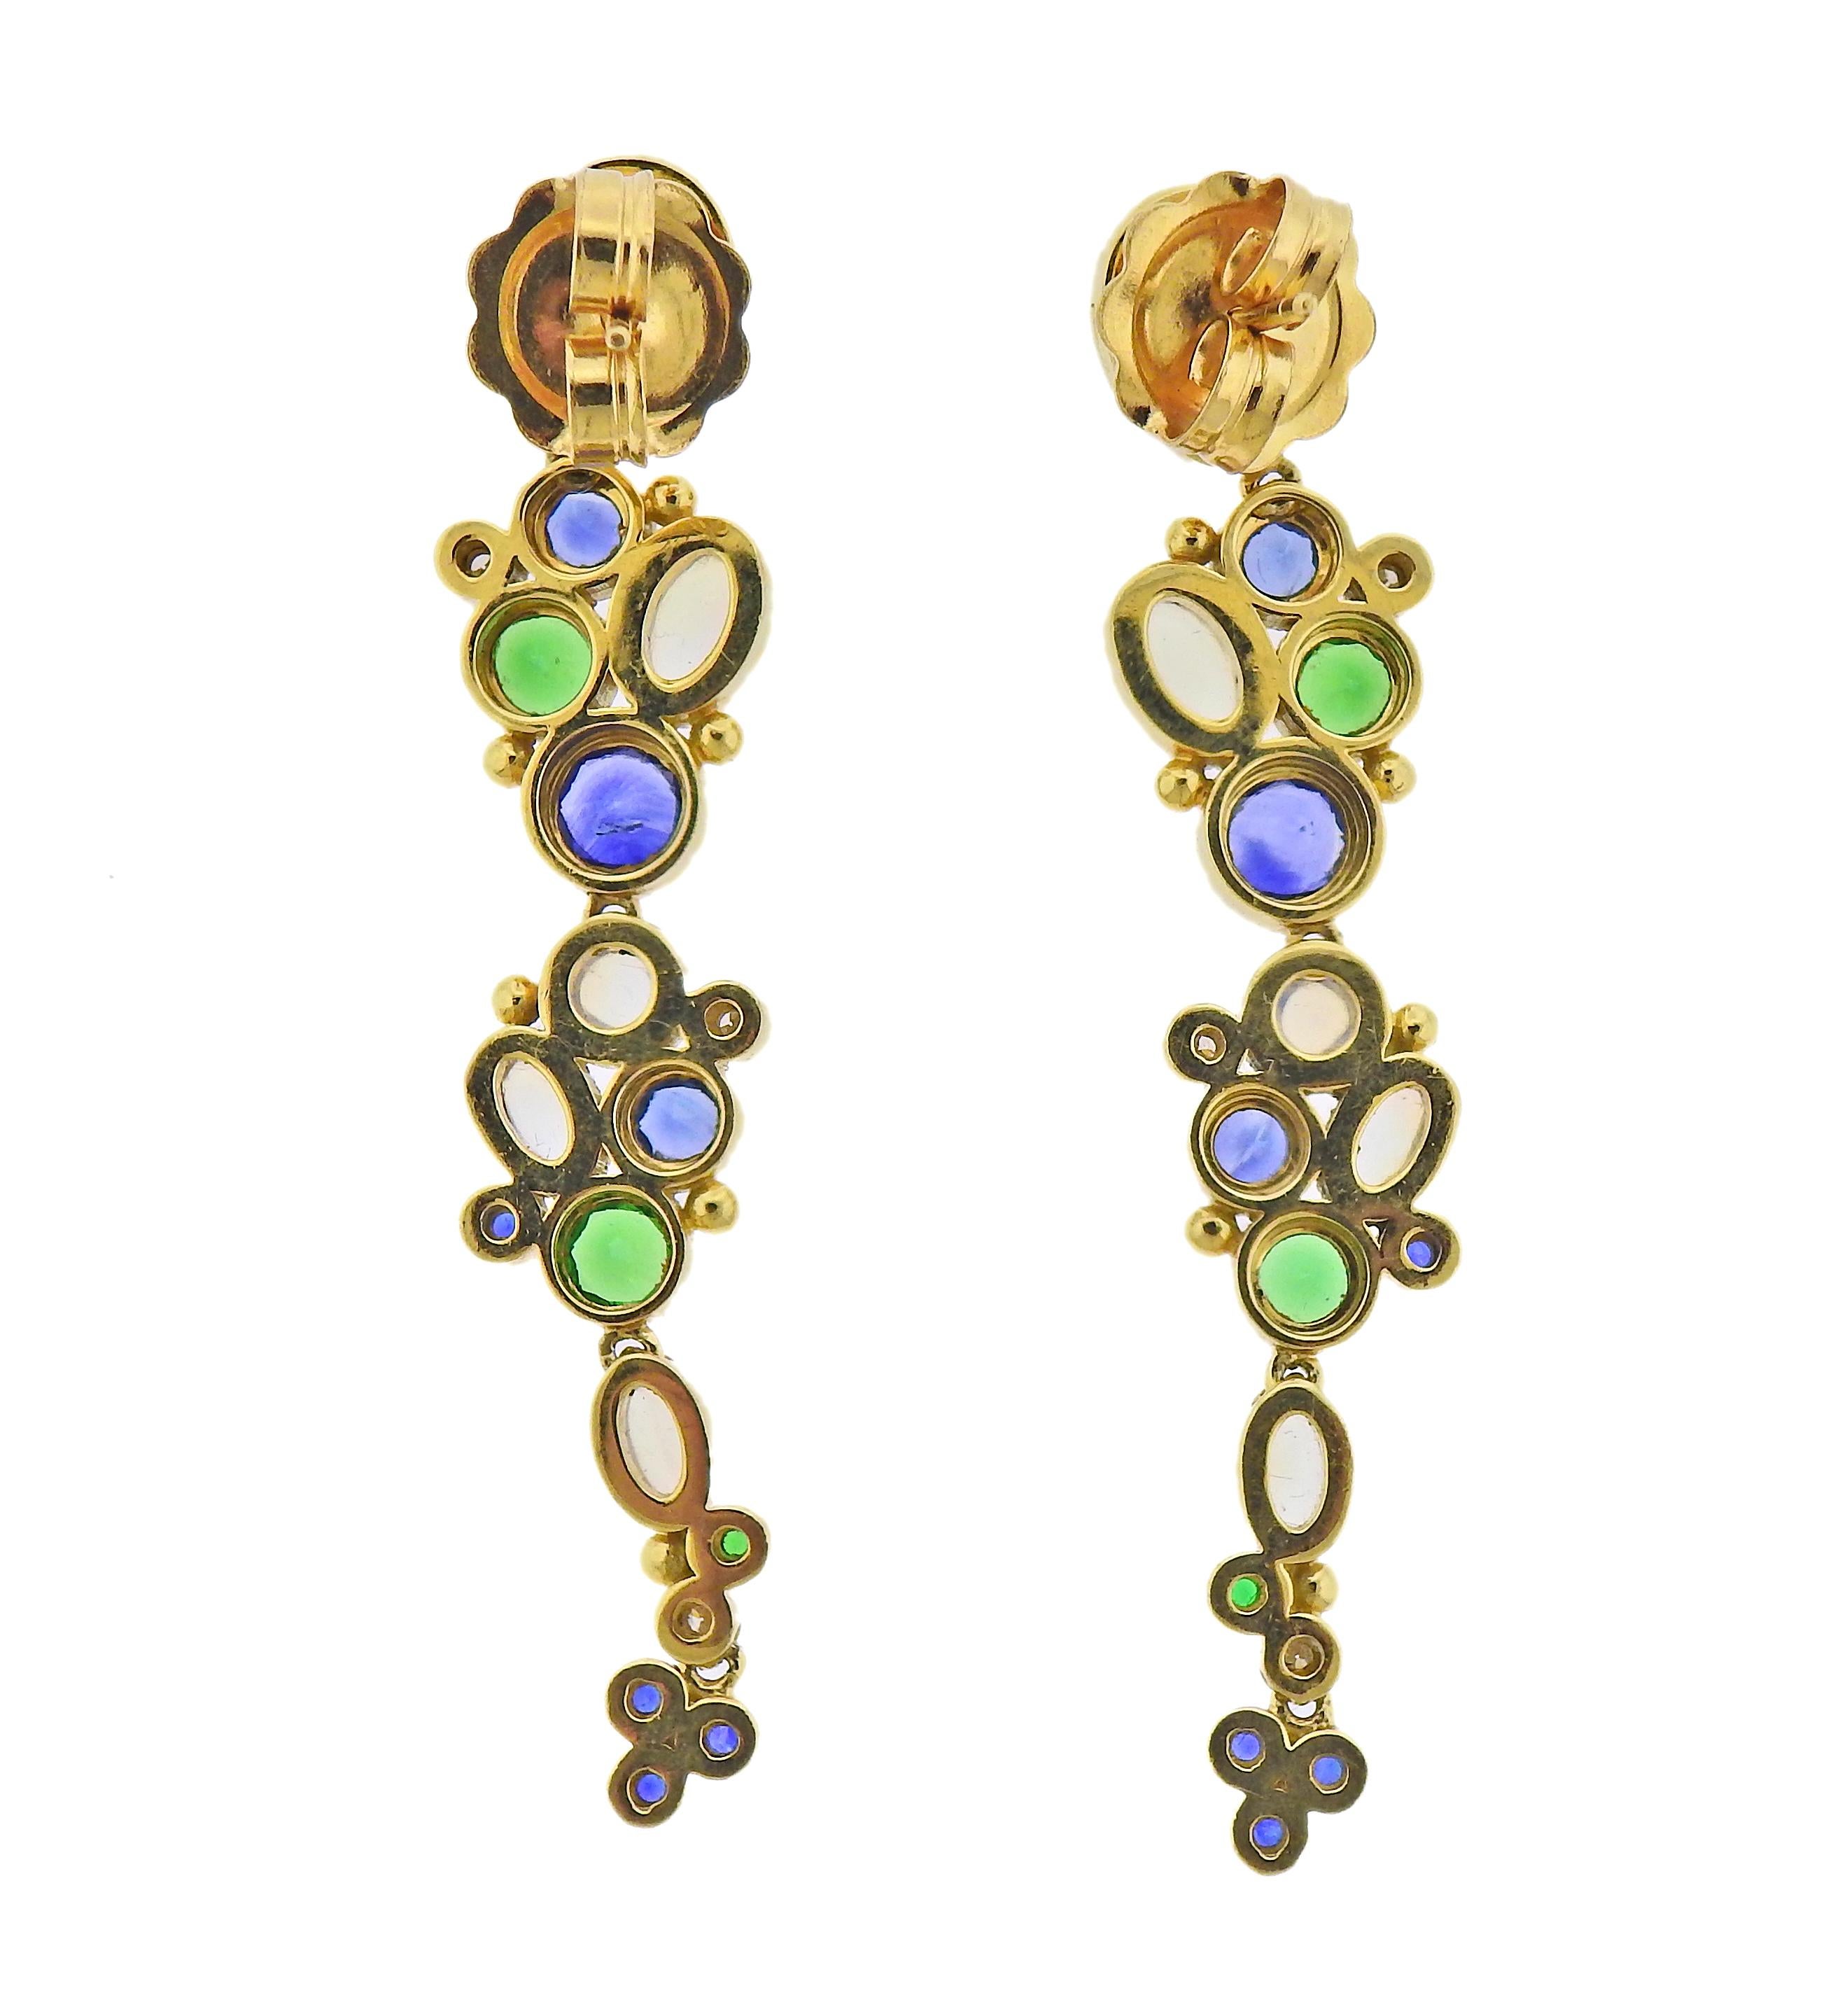 Pair of 18k gold drop earrings by Temple St. Clair, set with moonstones, tsavorites, sapphires and approx. 0.12cts in diamonds. Earrings are 58mm x 11mm. Marked: 750 and with a Temple mark. Weight - 16.4 grams.